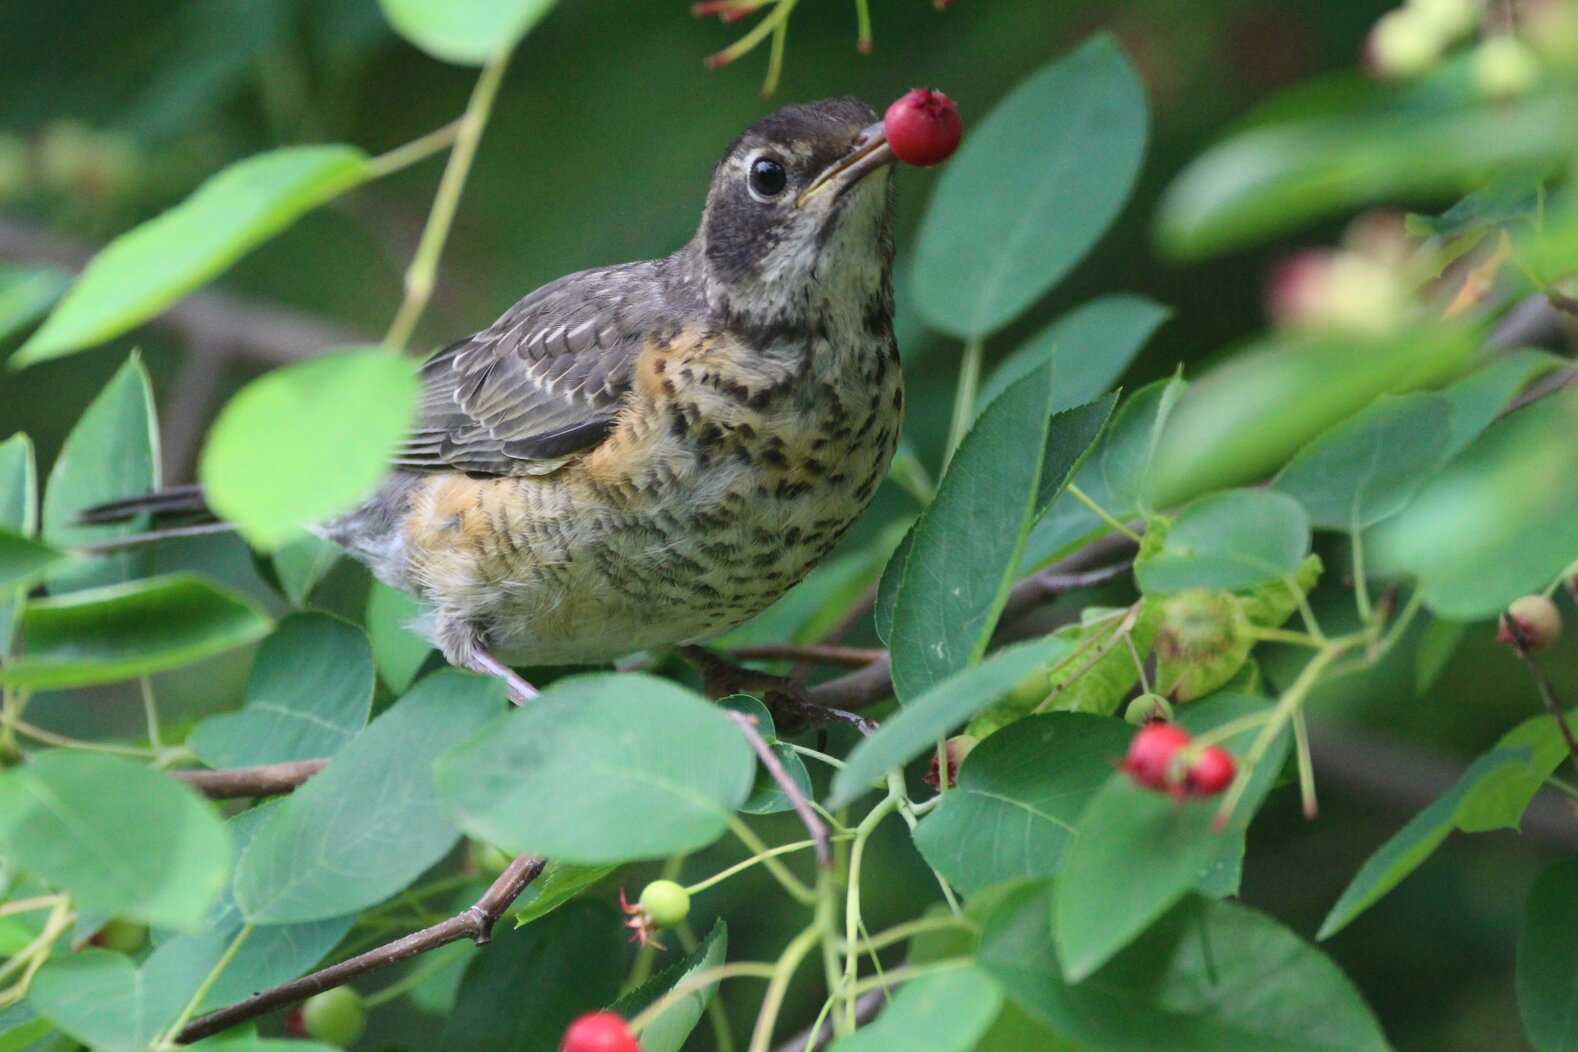 A young American Robin feeds on Shadbush berries. Photo: <a href="https://www.flickr.com/photos/89780664@N05/" target="_blank">Dave Ostapiuk</a>